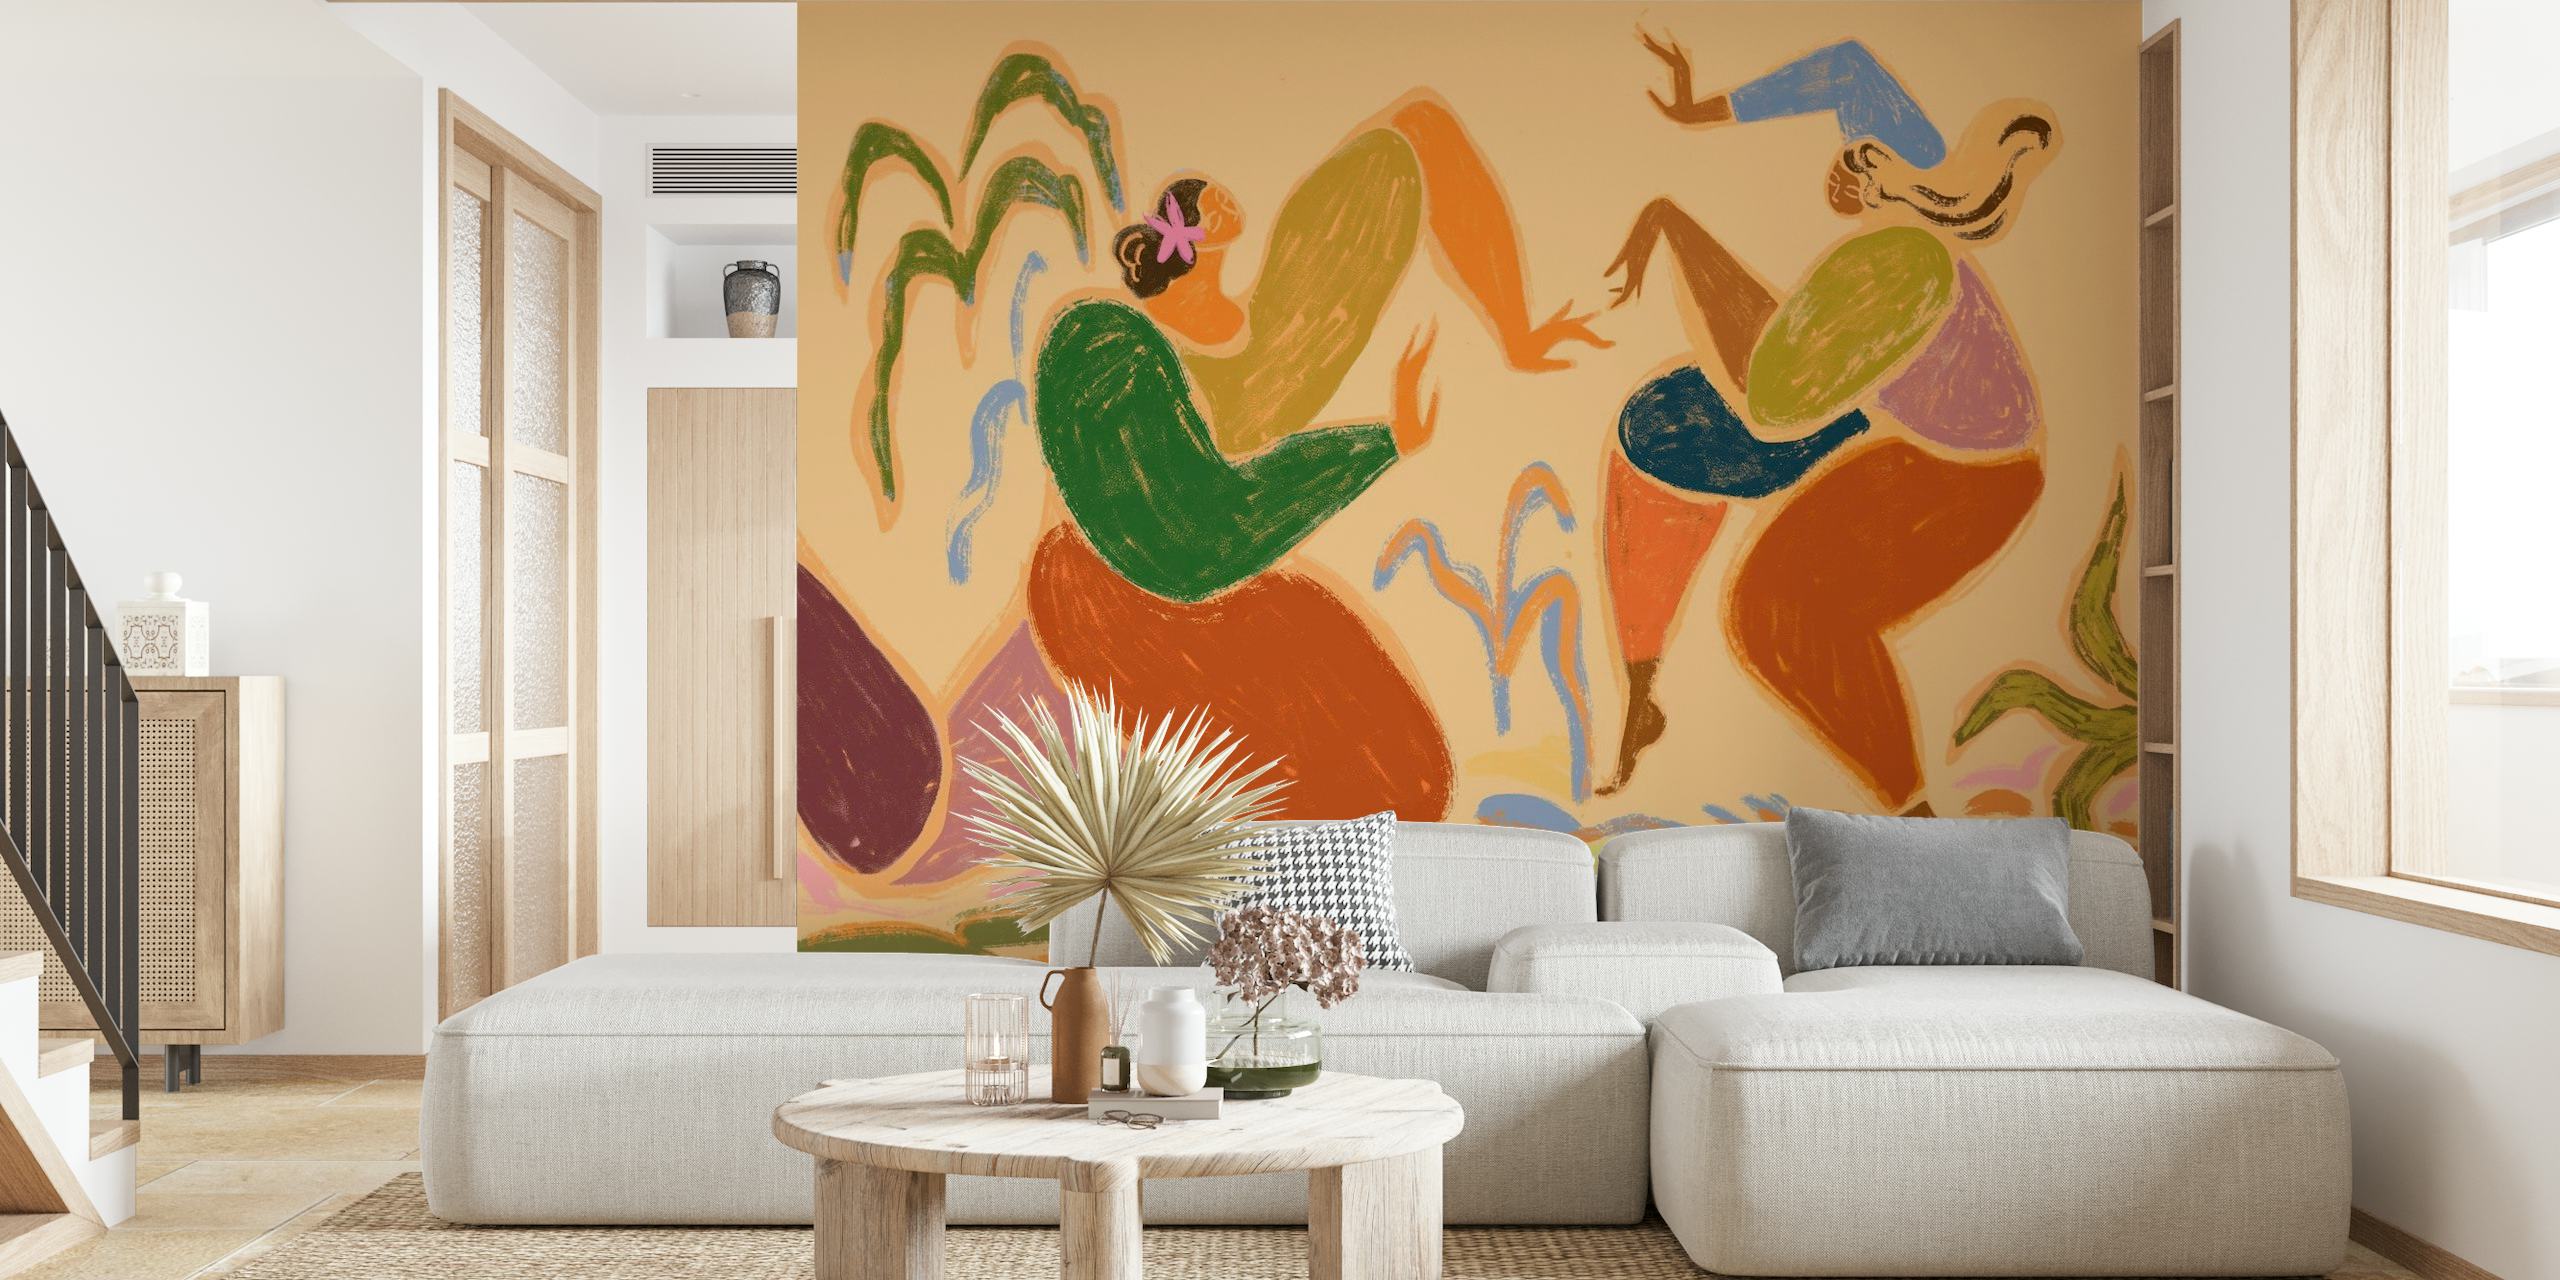 Abstract dance-themed wall mural with earth-tone colors depicting rhythmic figures in motion